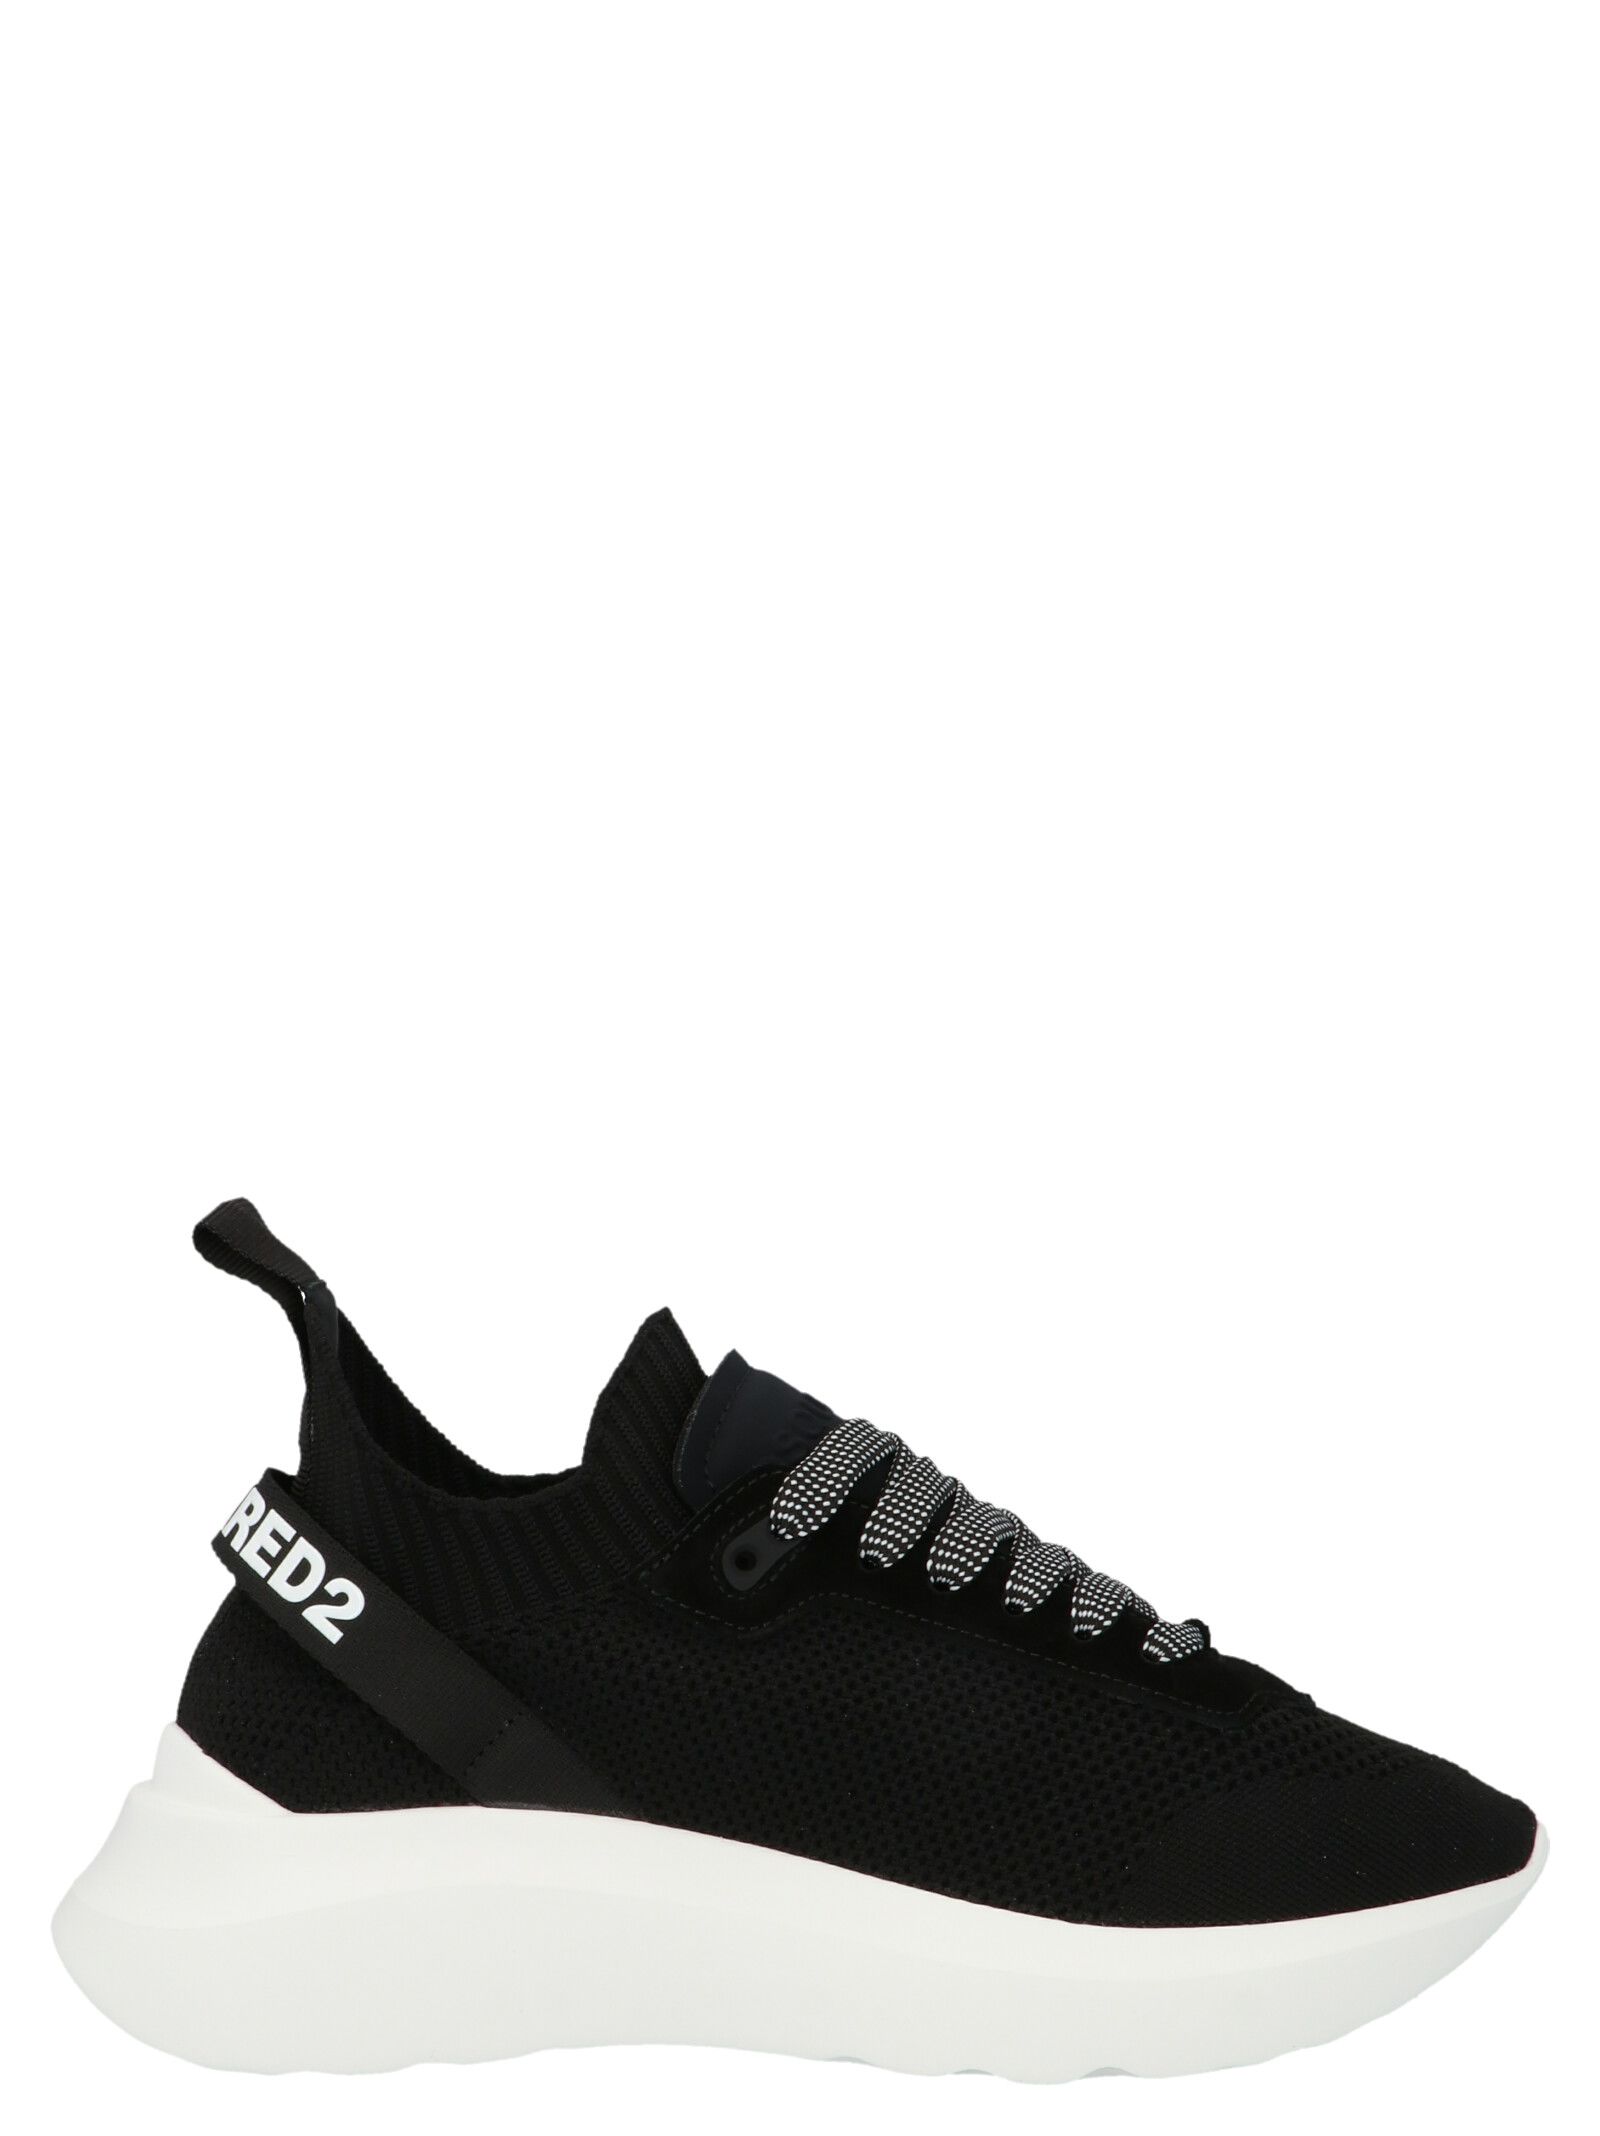 dsquared2 sneakers sale